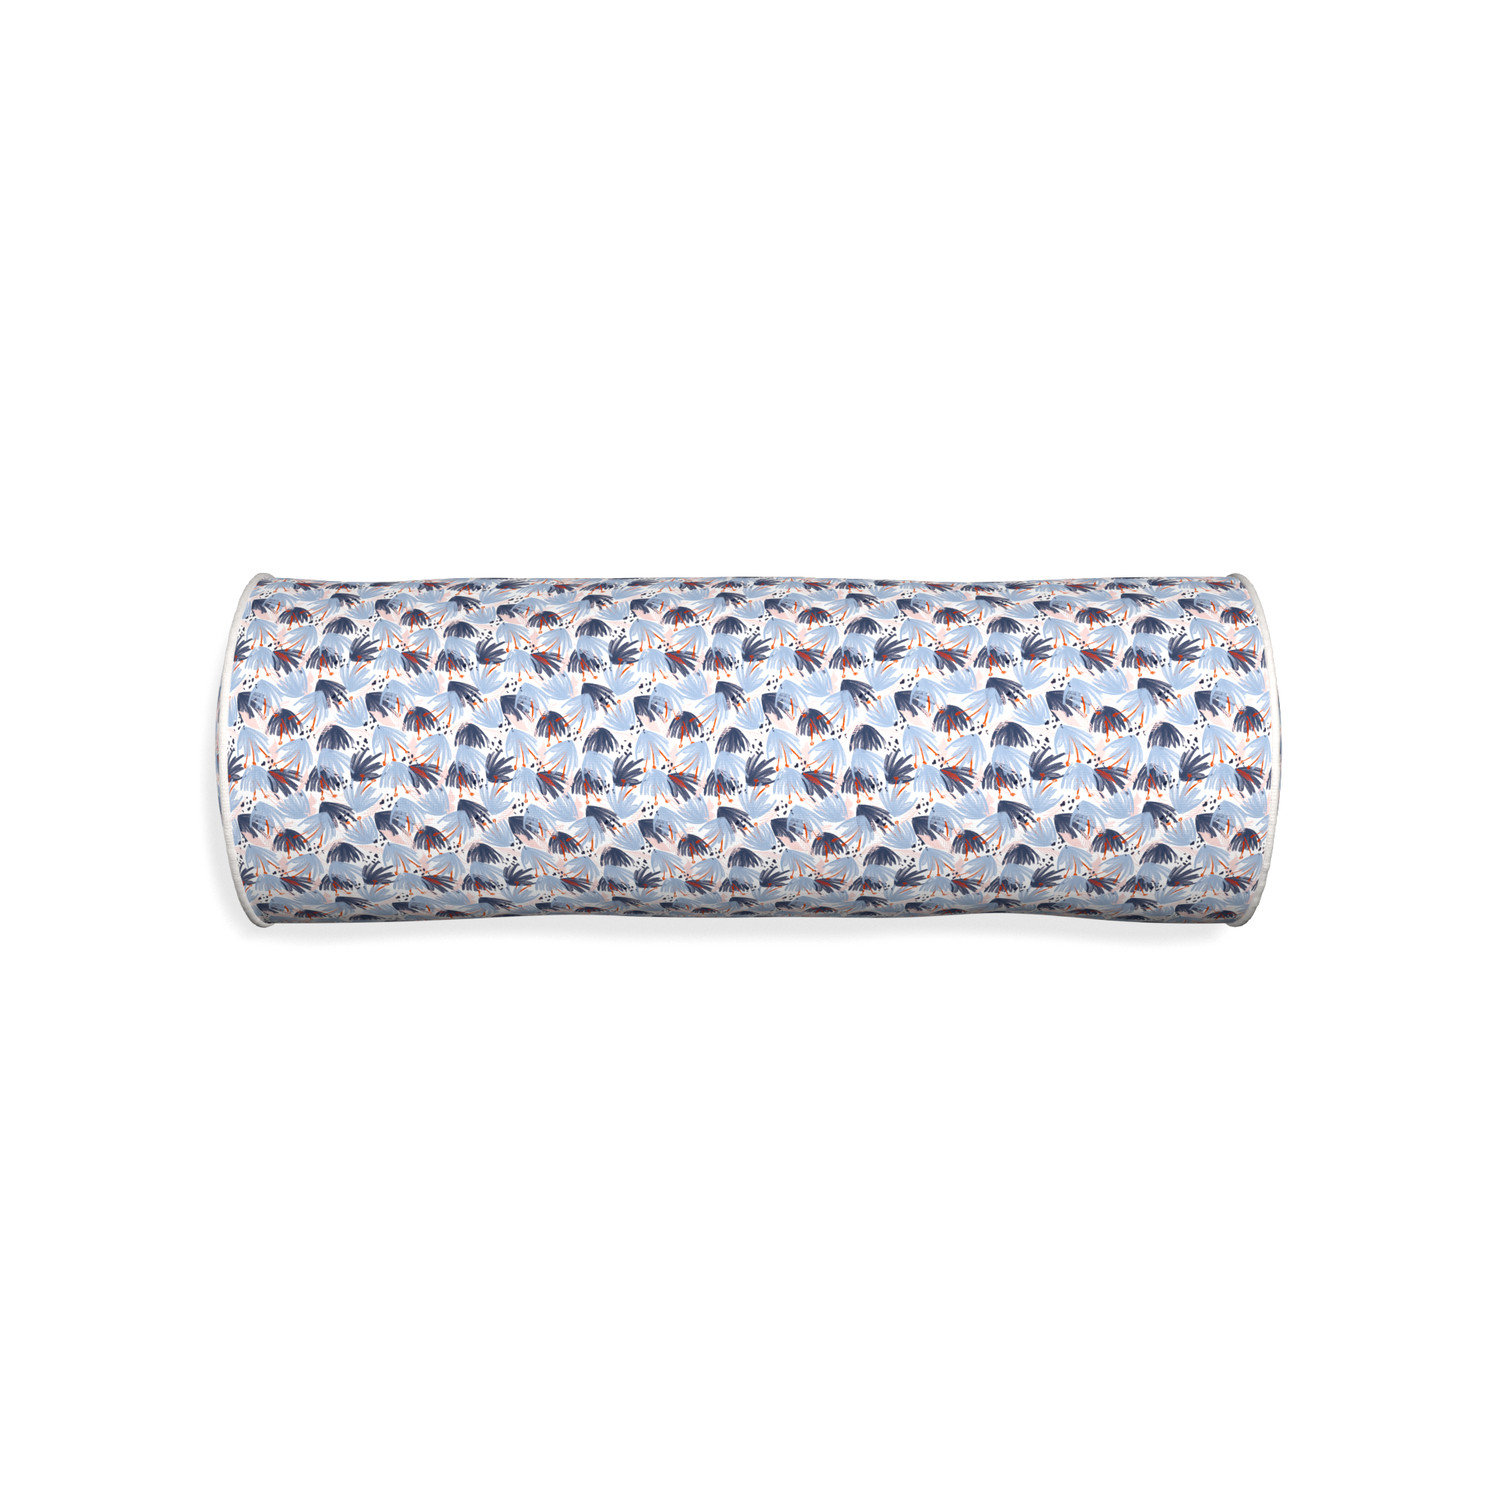 Bolster eden blue custom red and bluepillow with snow piping on white background